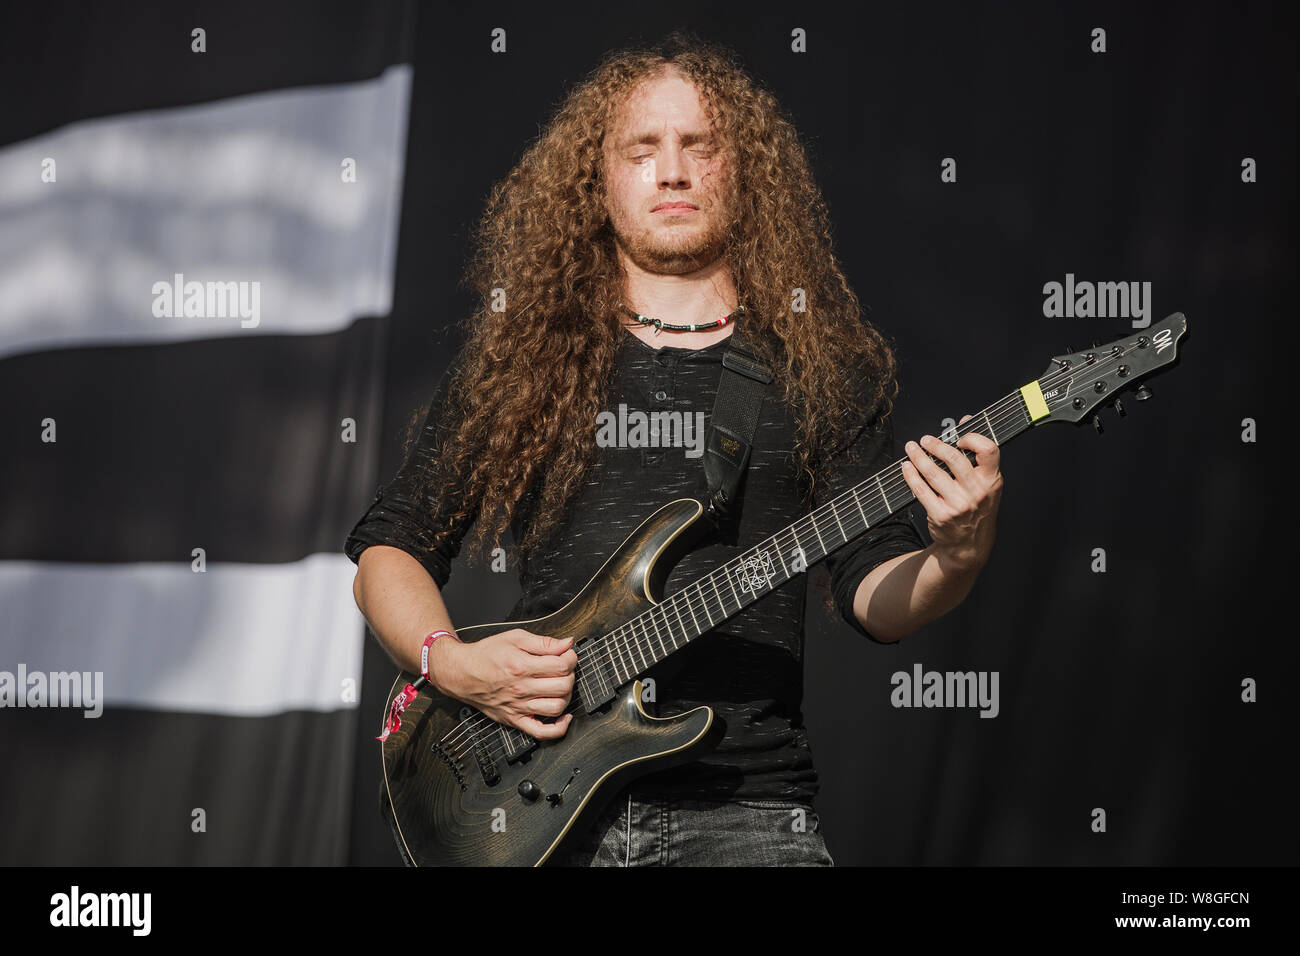 Tesseract perform live on stage at Bloodstock Open Air Festival, UK, 9th Aug, 2019. Stock Photo